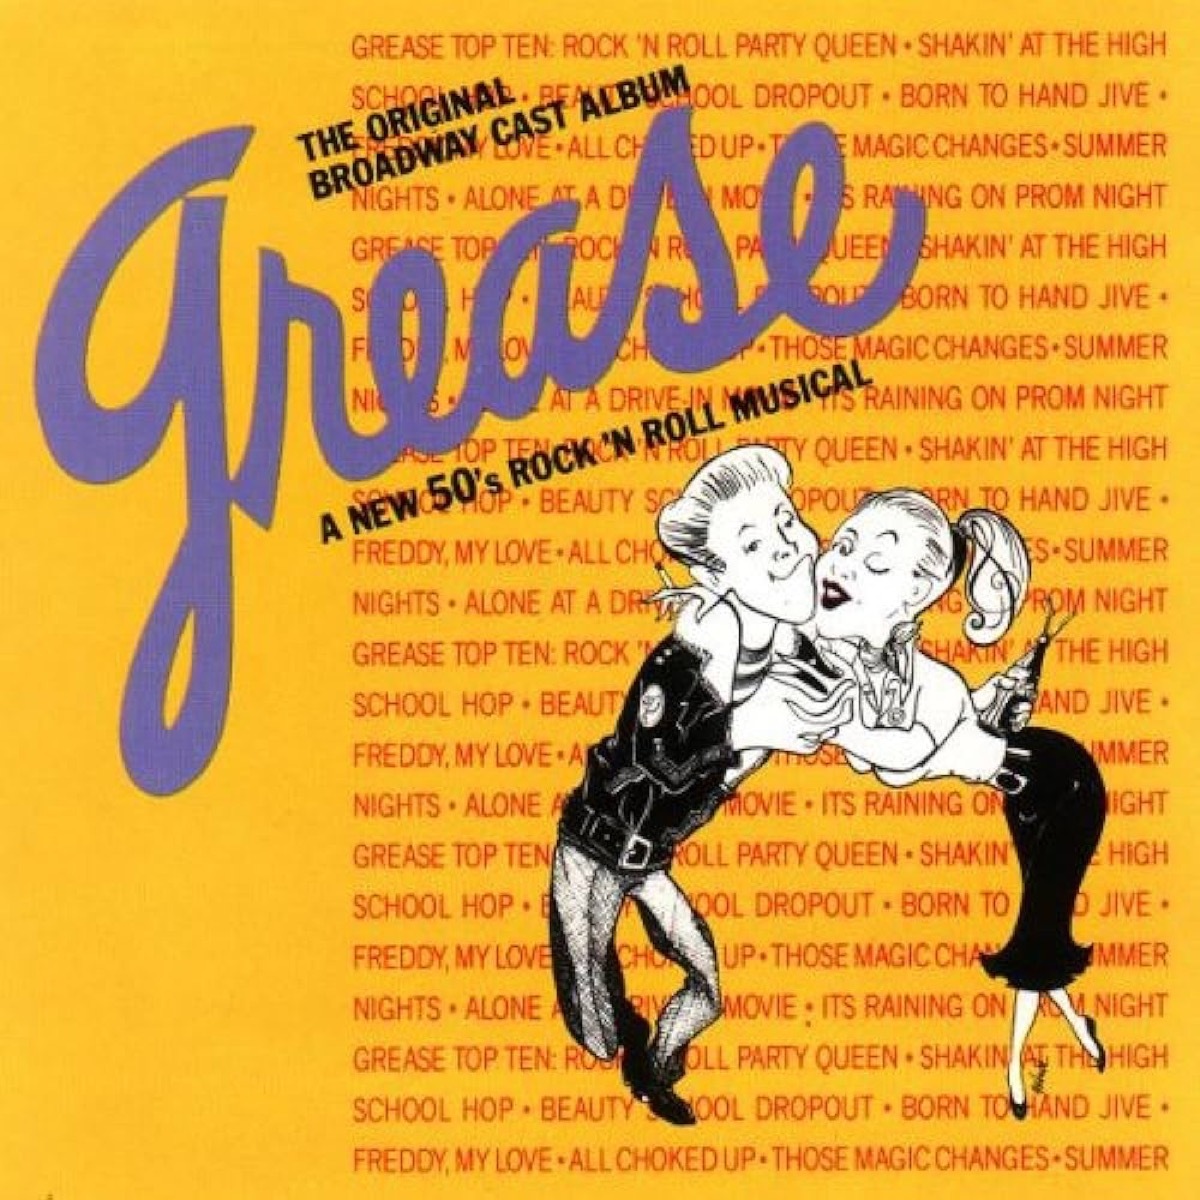 Grease cast recording